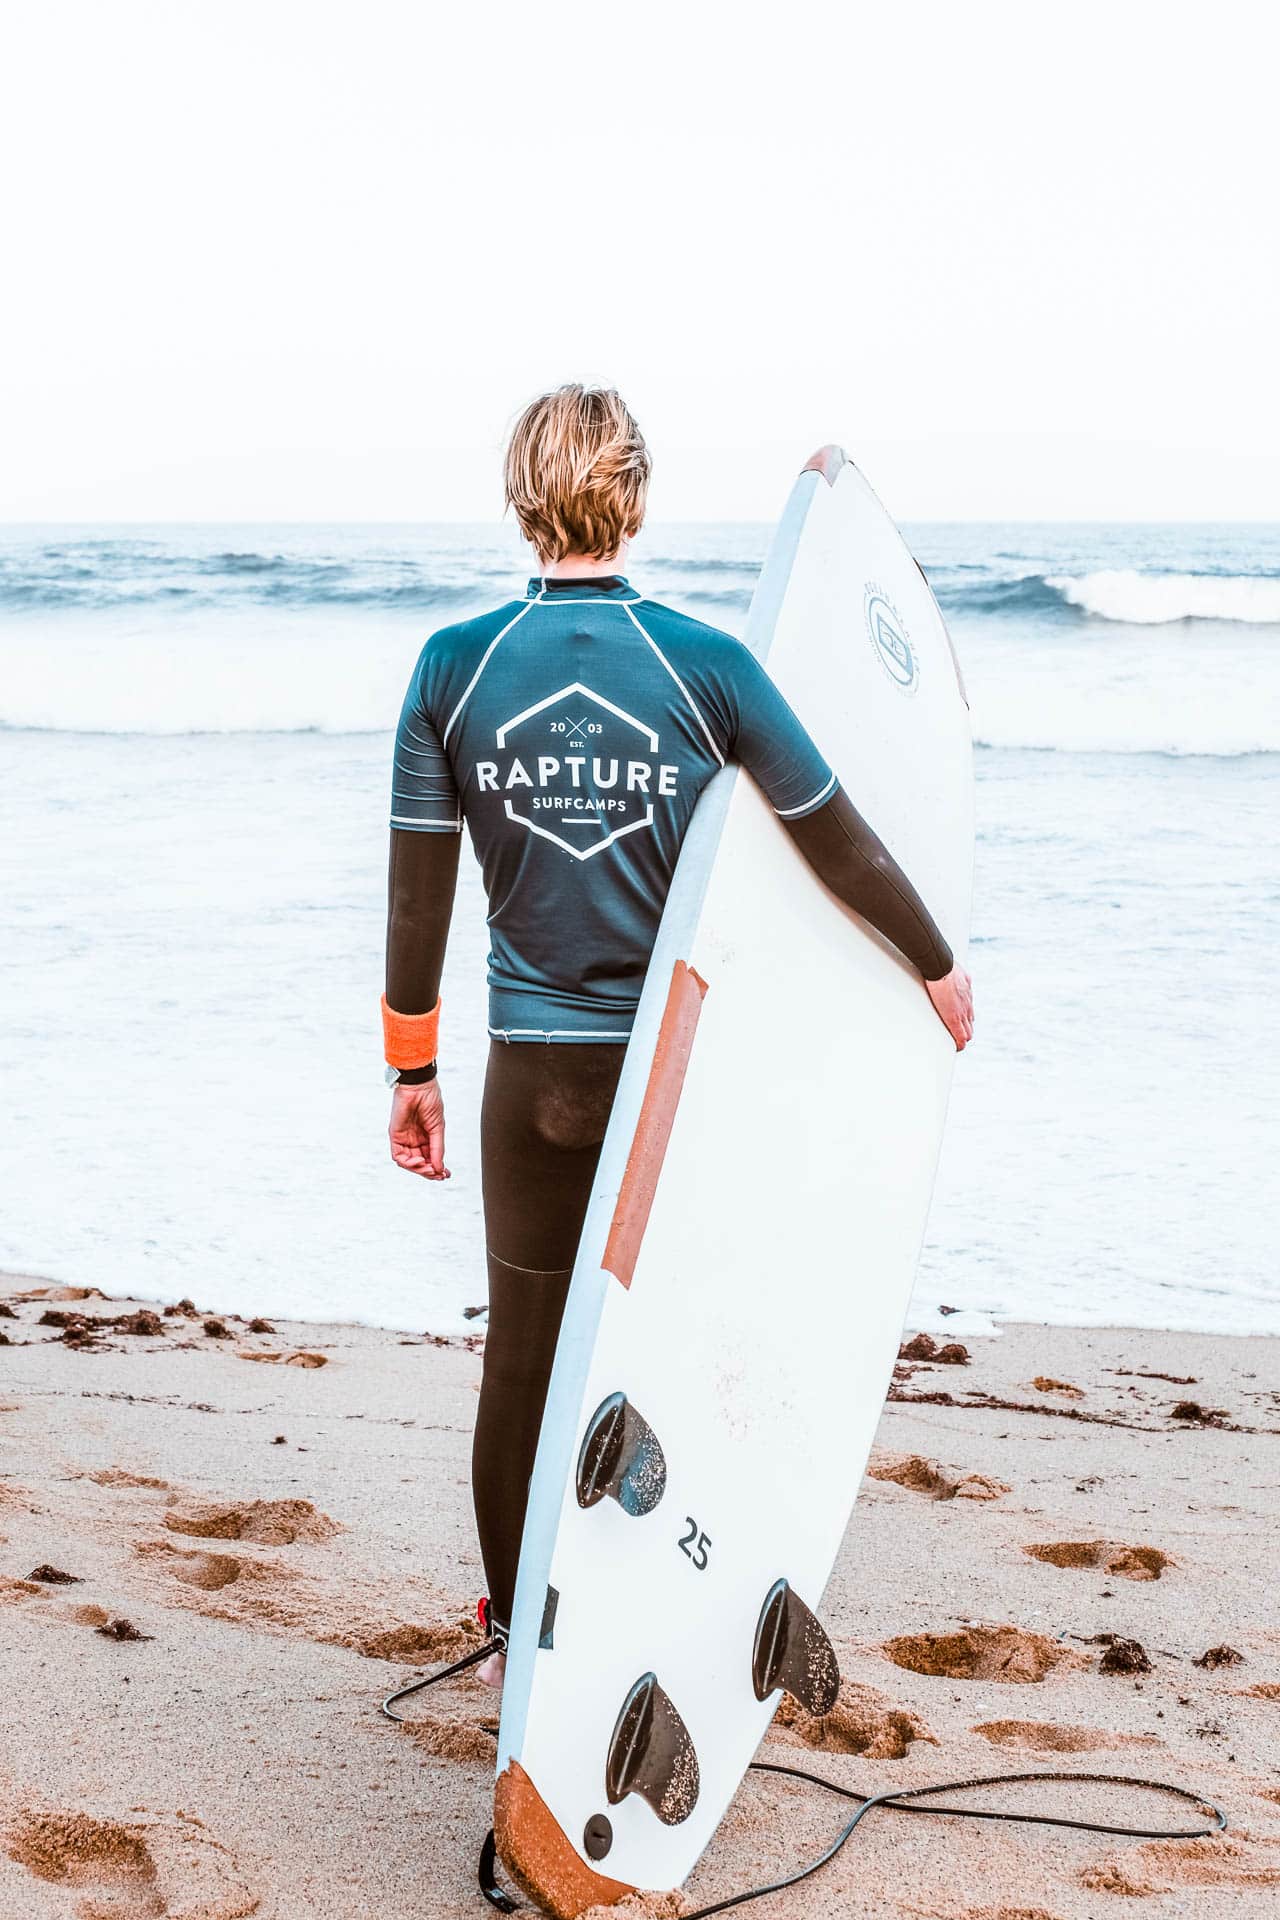 Person wearing Rapture Surfcamps Surf wear holding a surfboard and facing the ocean.